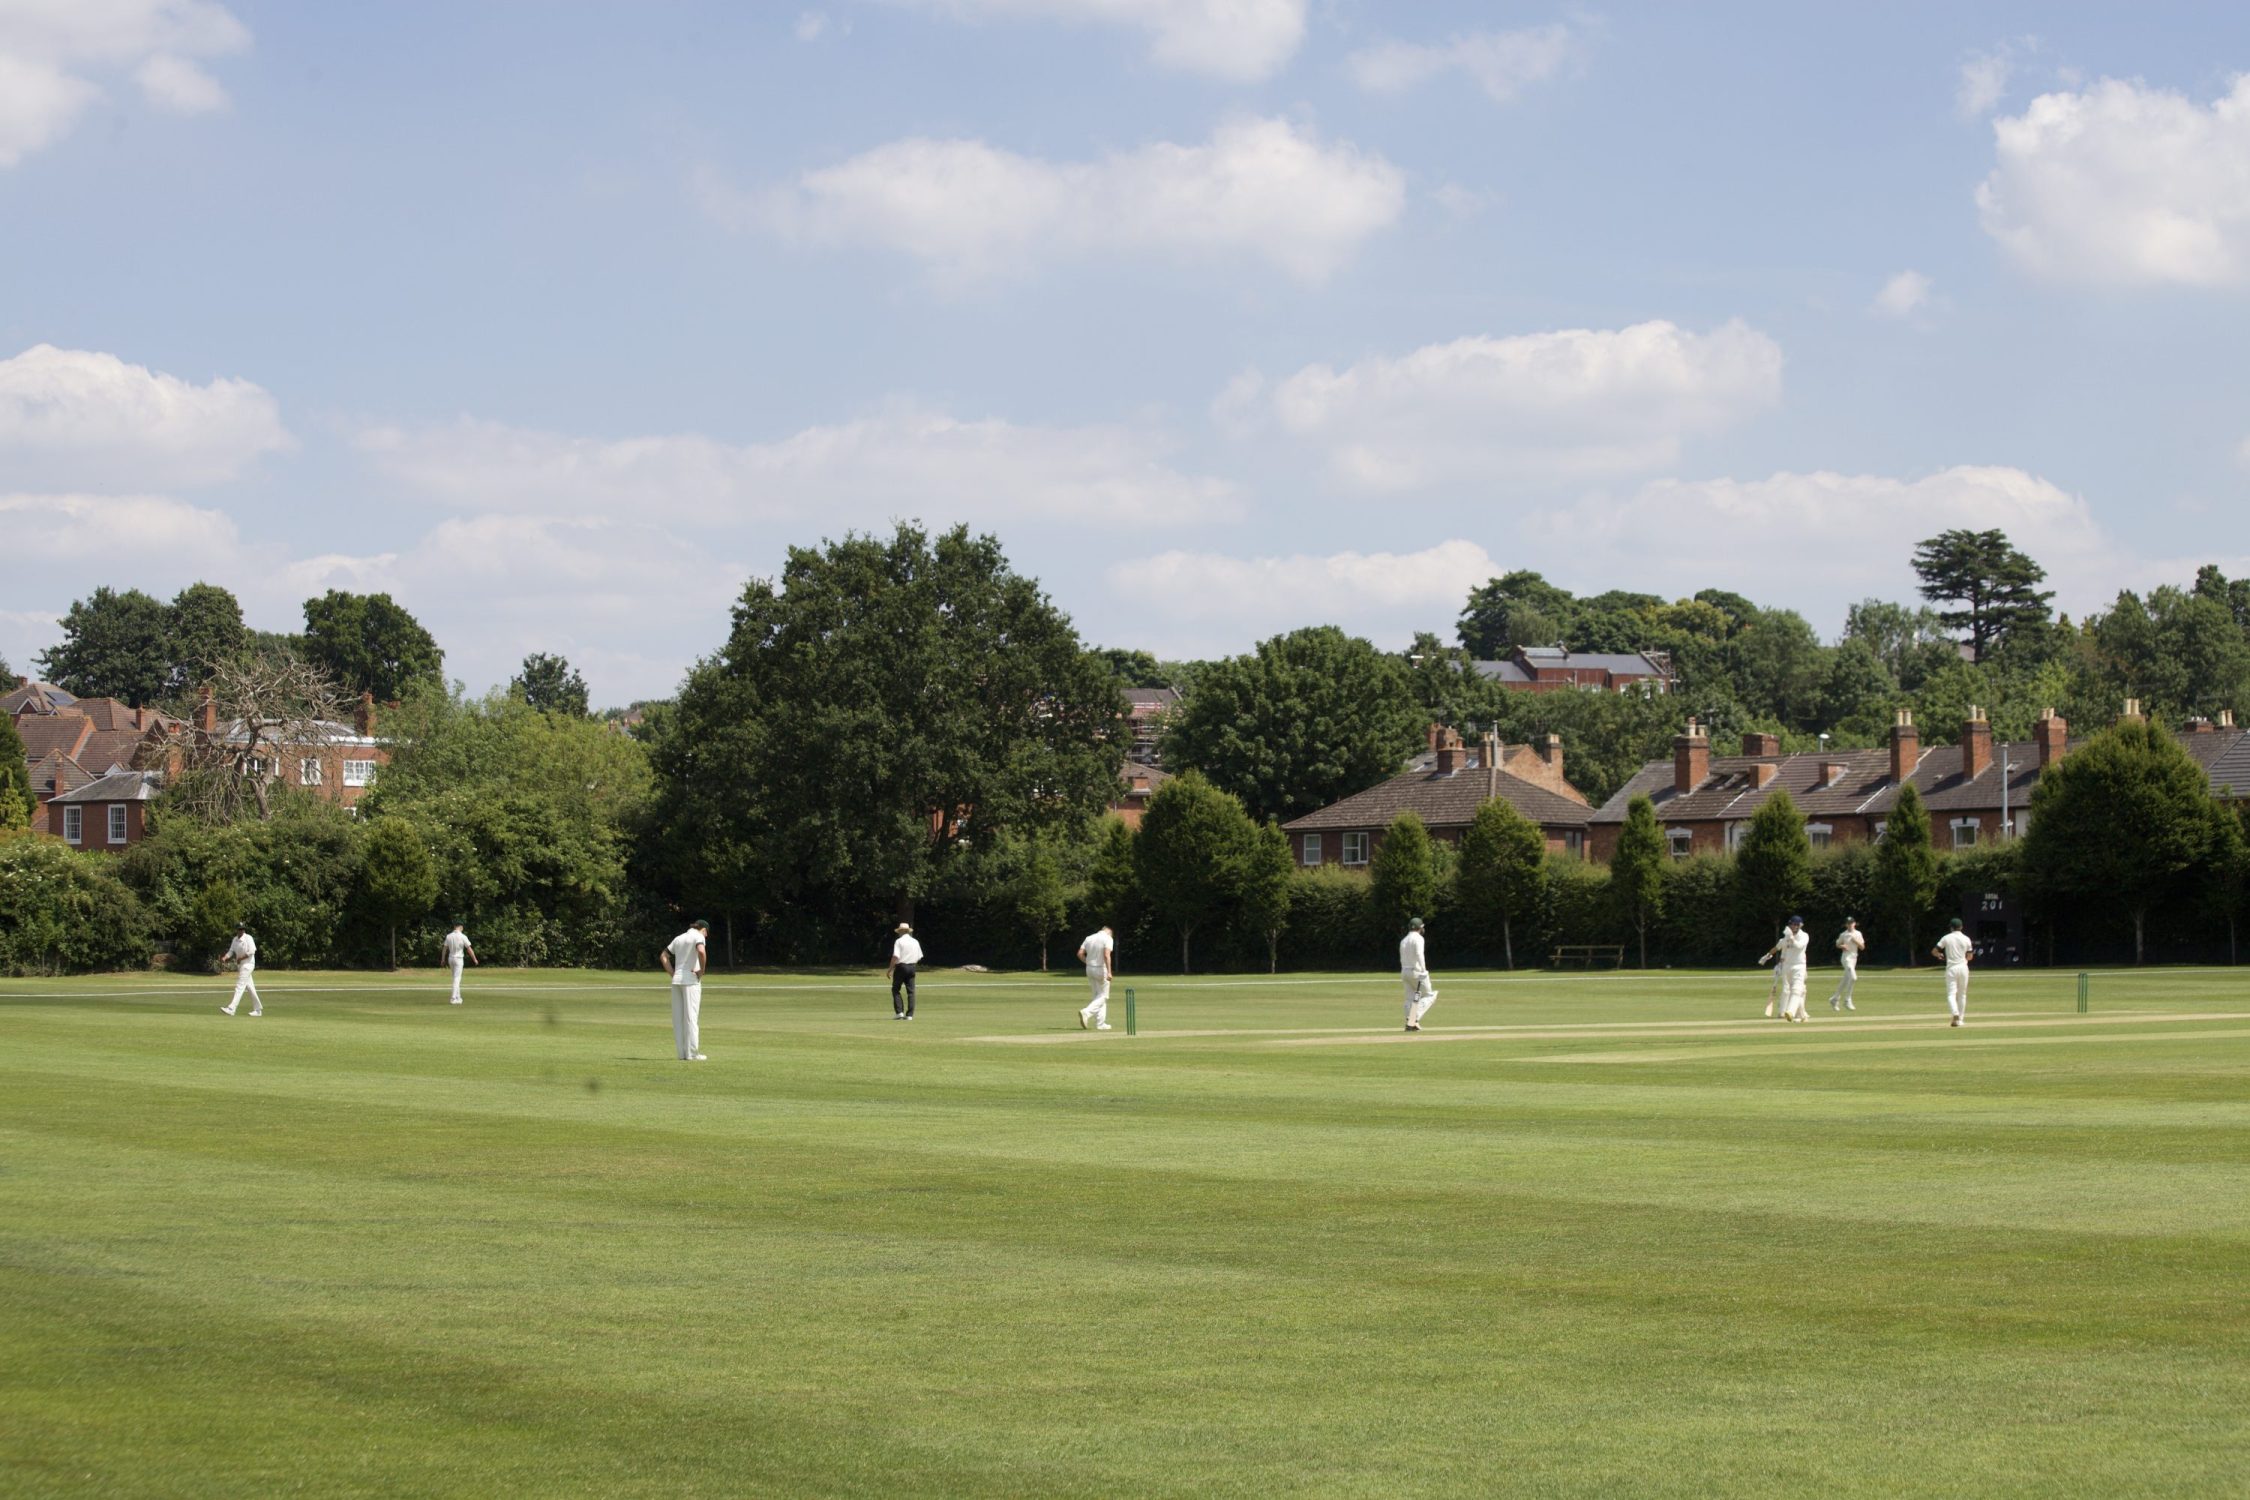 Cricket being played on the RGS Flagge Meadow Sports Ground 